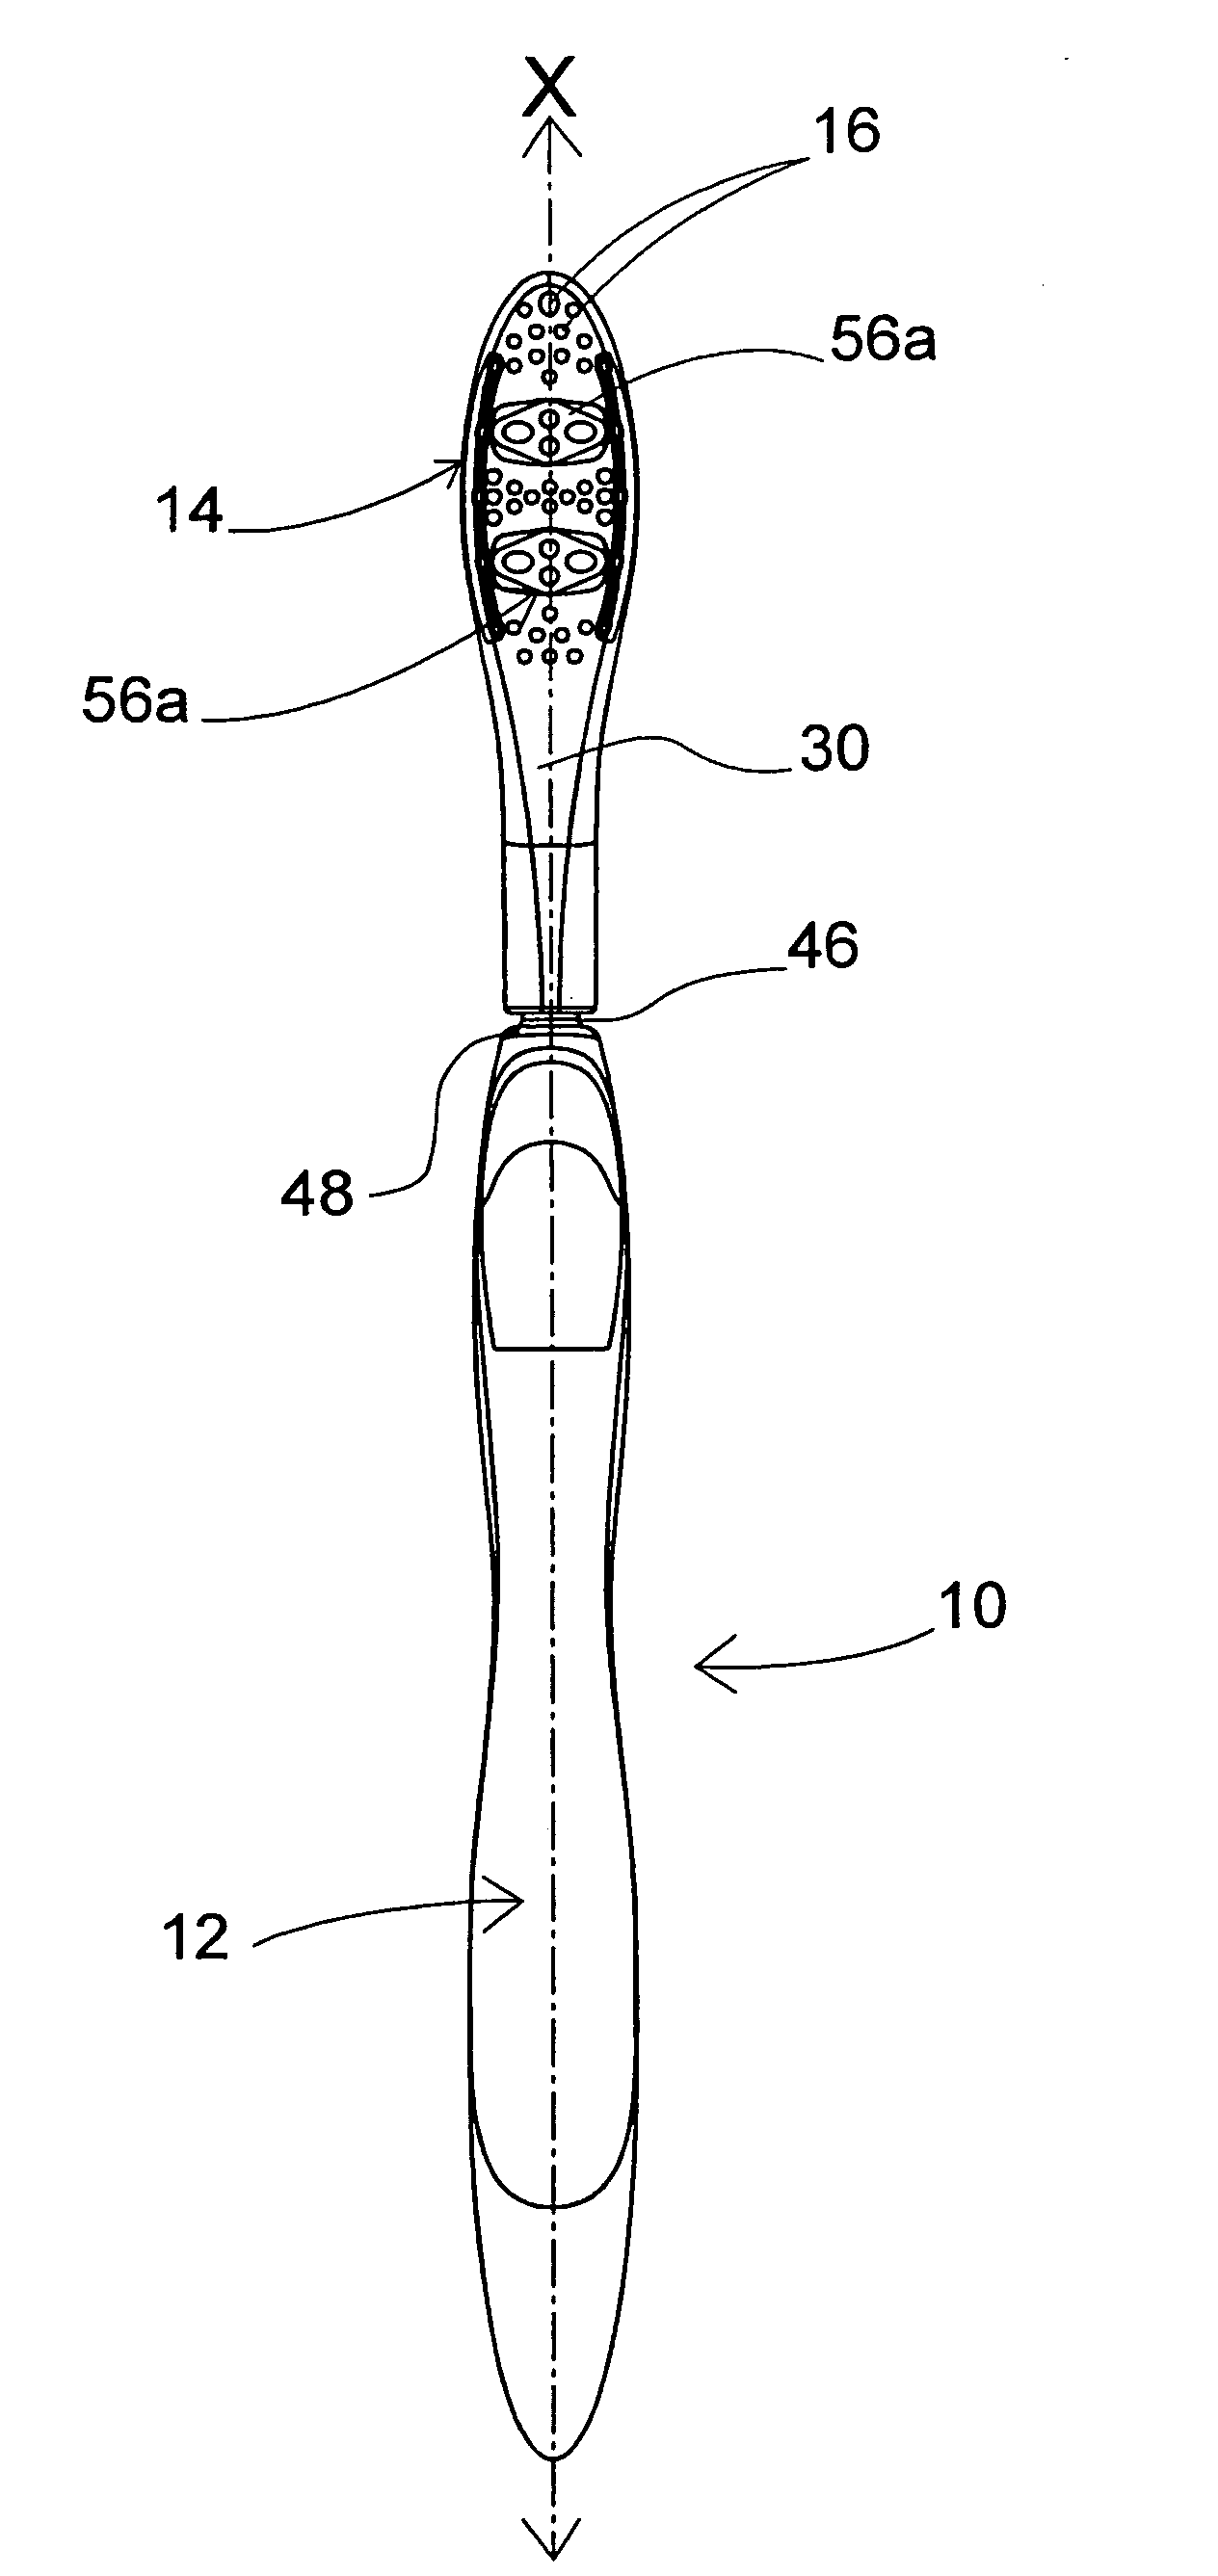 Manual toothbrush with movable head